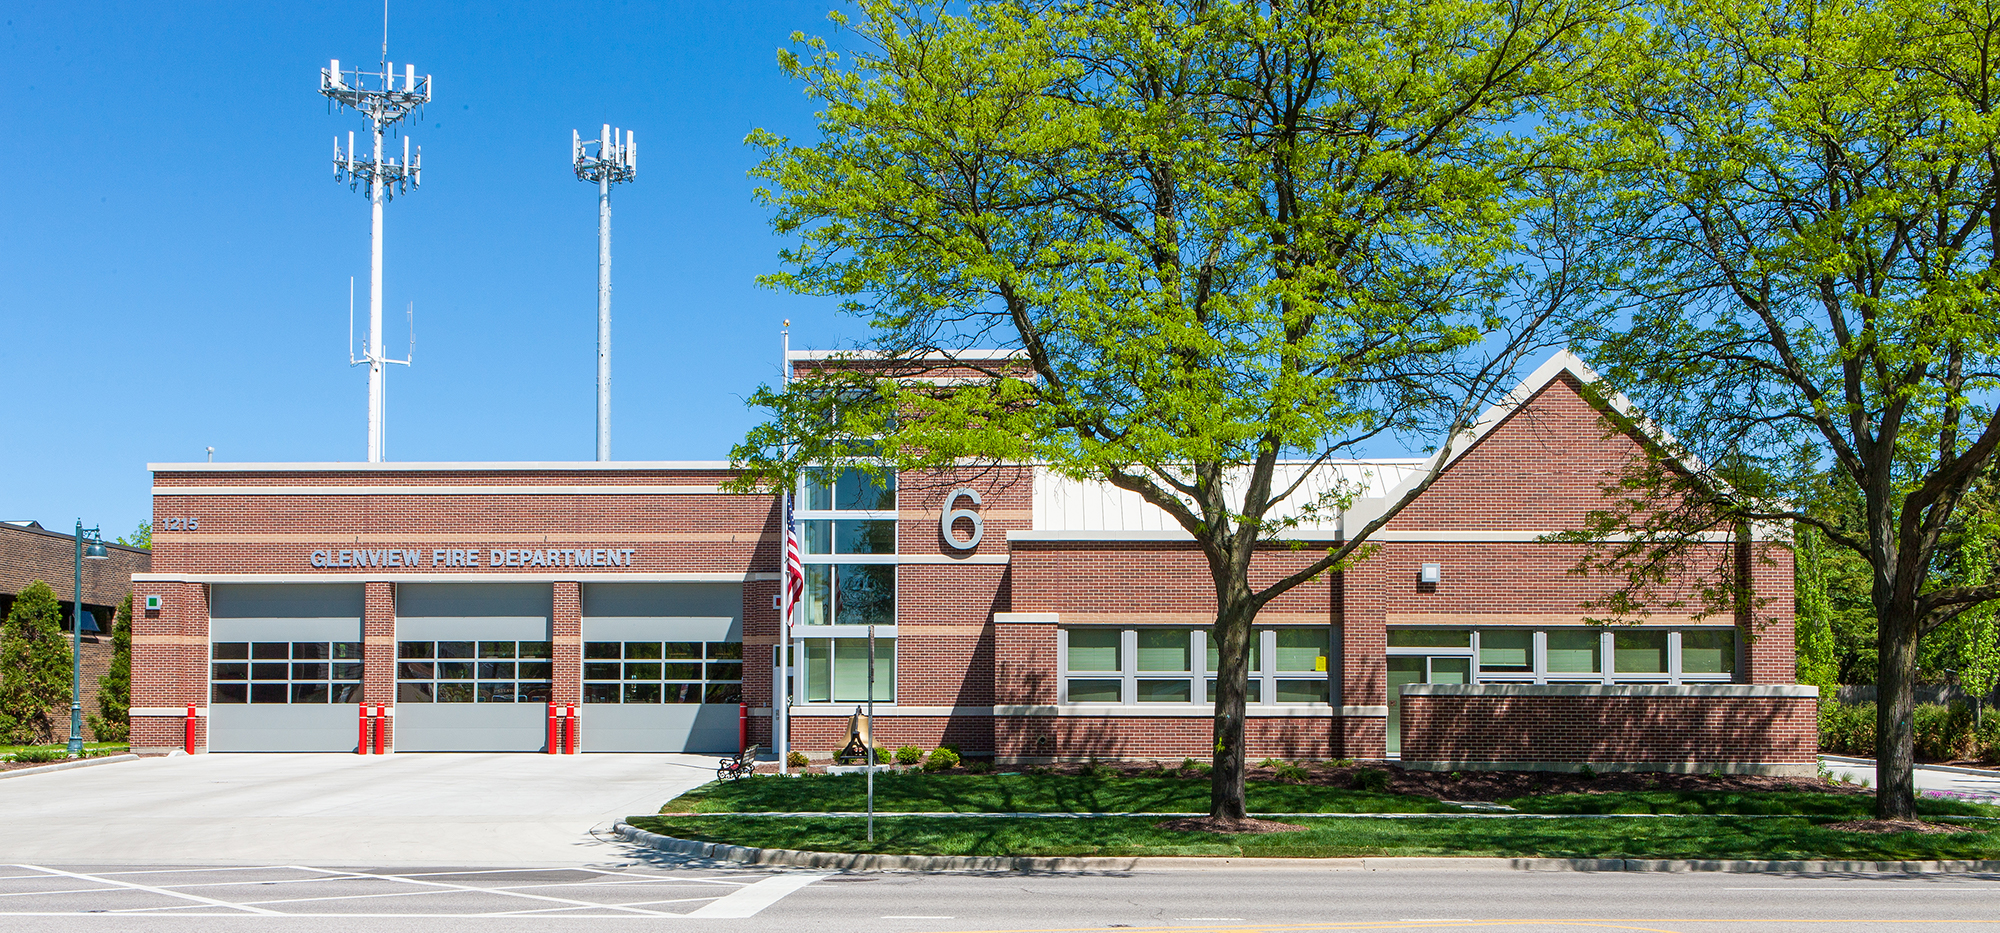 fire station in glenview illinois